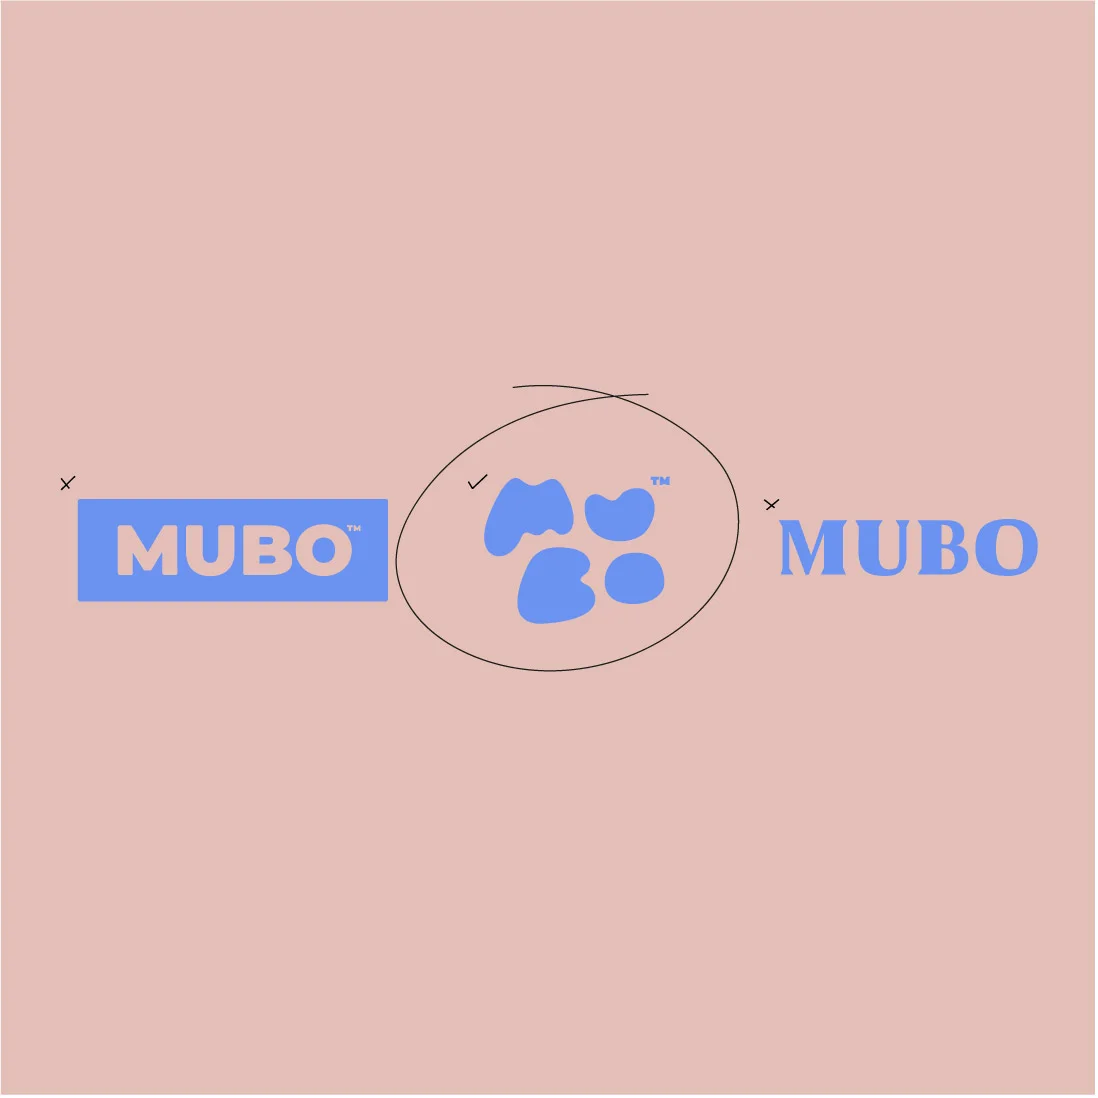 A minimalist brand design with a light pink background, featuring a large circle at the center with a blue paw print inside. The word 